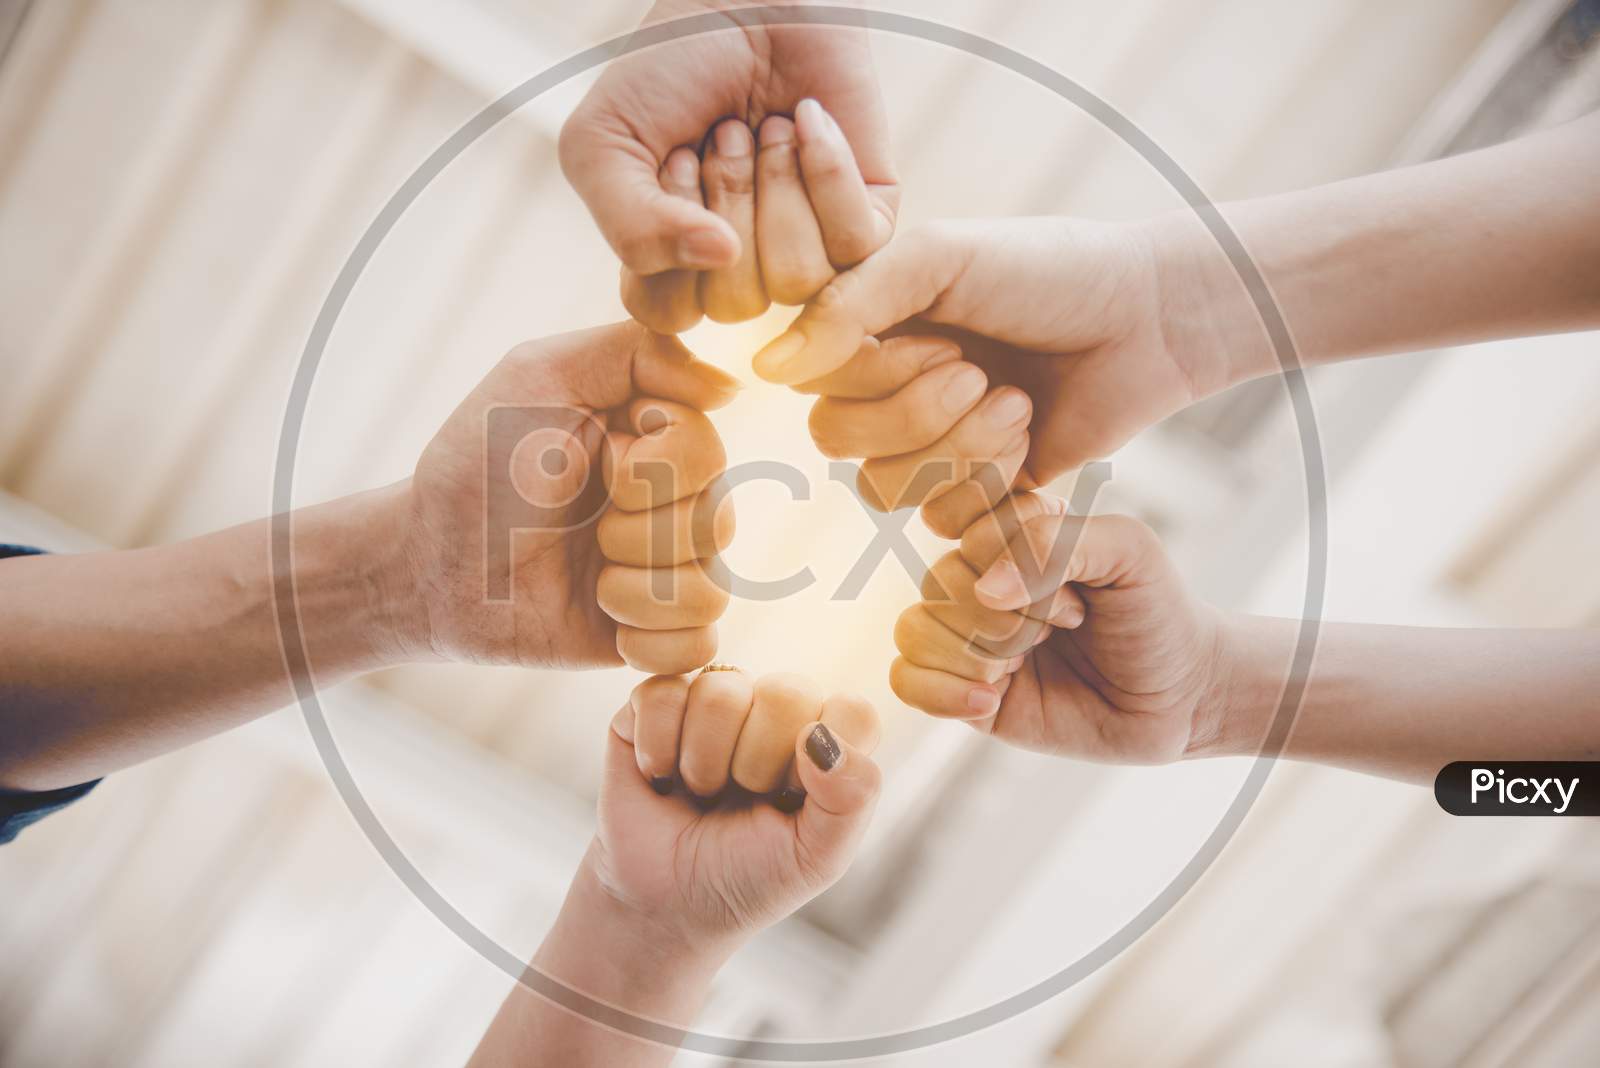 Fist Bump Of Friendship And Teamwork For Startup New Project. Business And Togetherness Concept. Cooperation And Successful Concept. People And Hands Theme. Warm Tone Filter